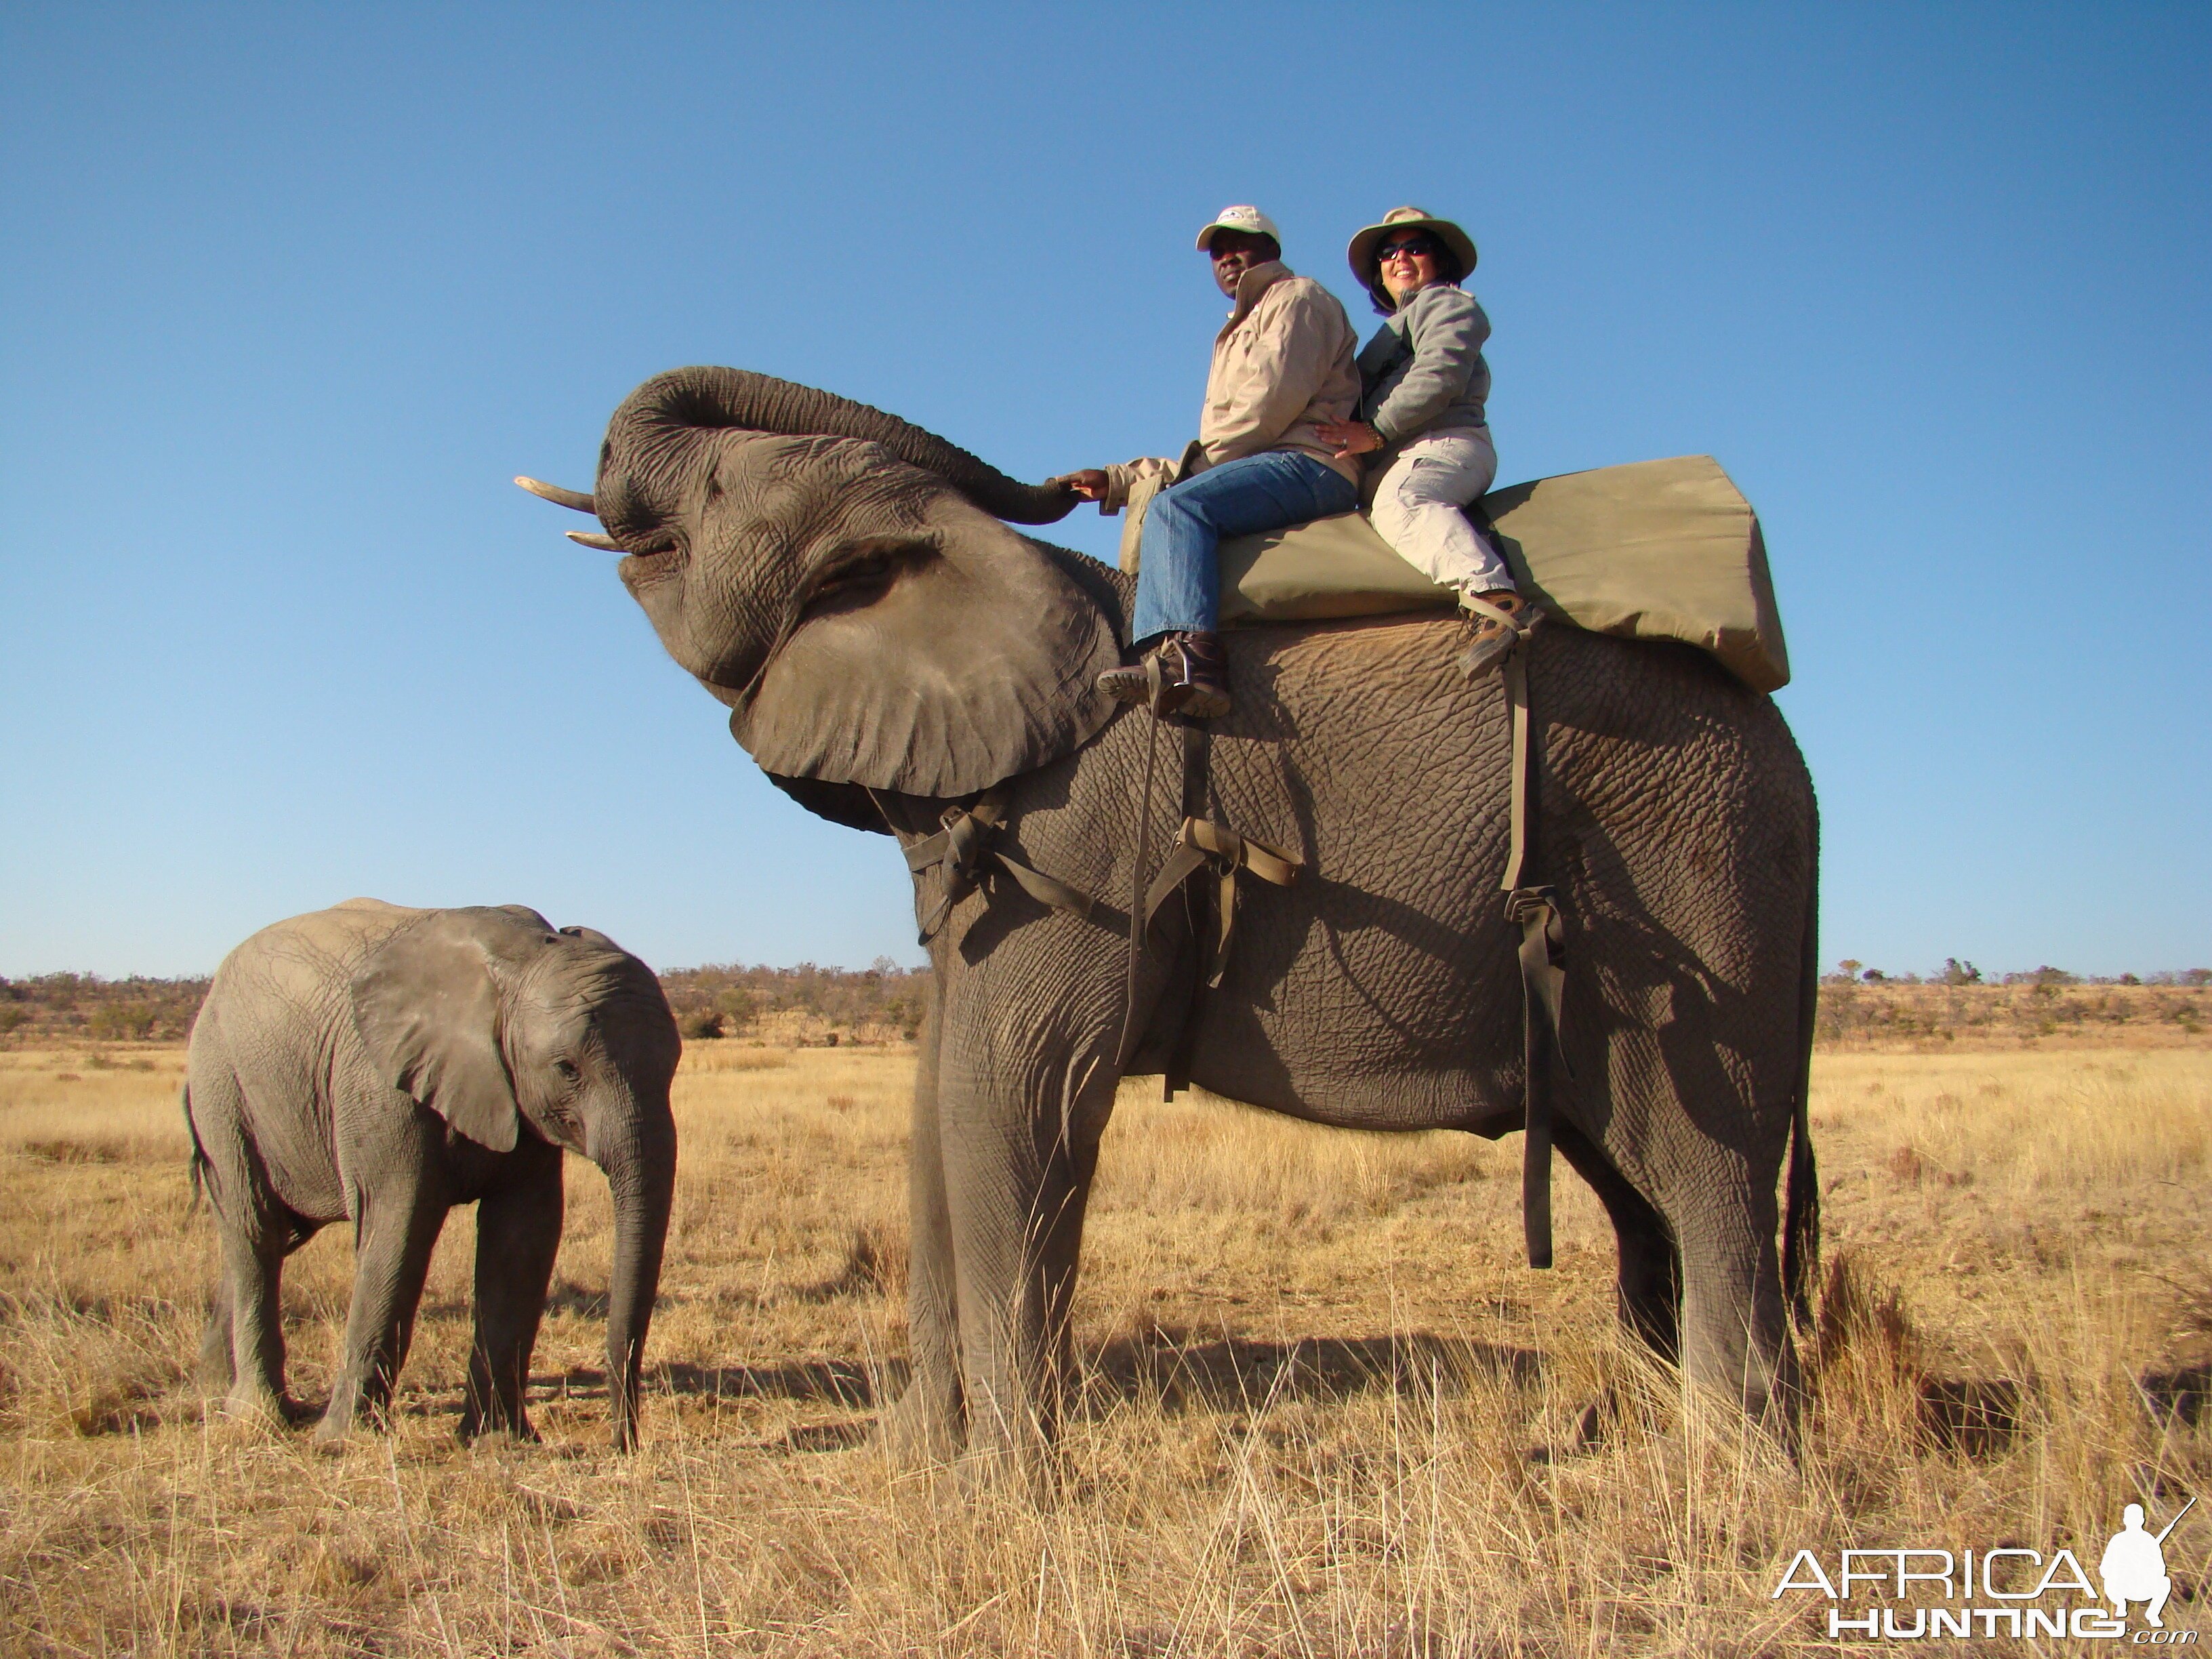 Elephant Ride Limpopo South Africa